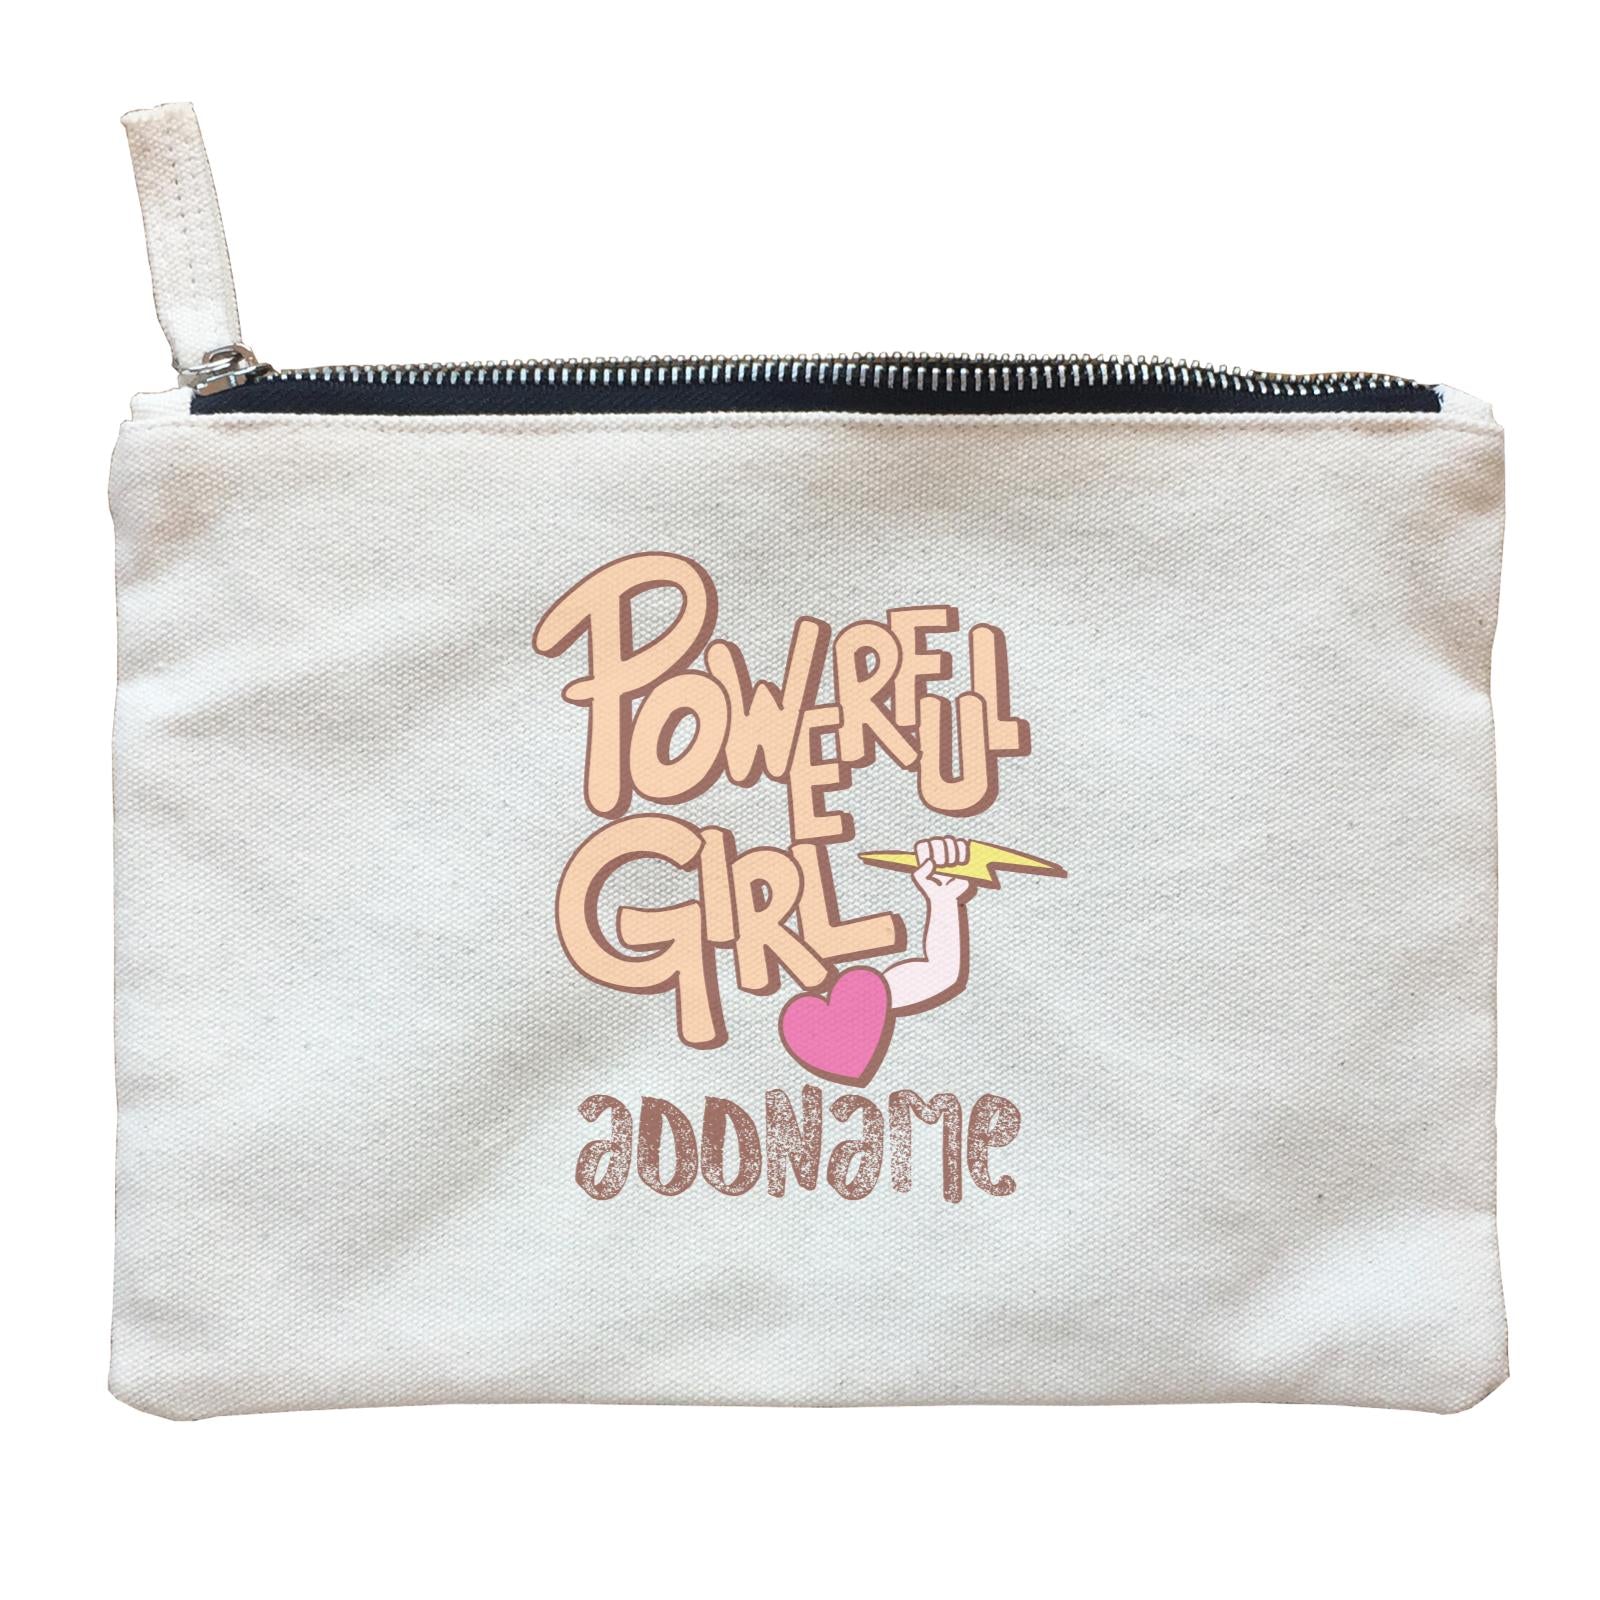 Cool Cute Words Powerful Girl Heart Hold Lightning Addname Zipper Pouch